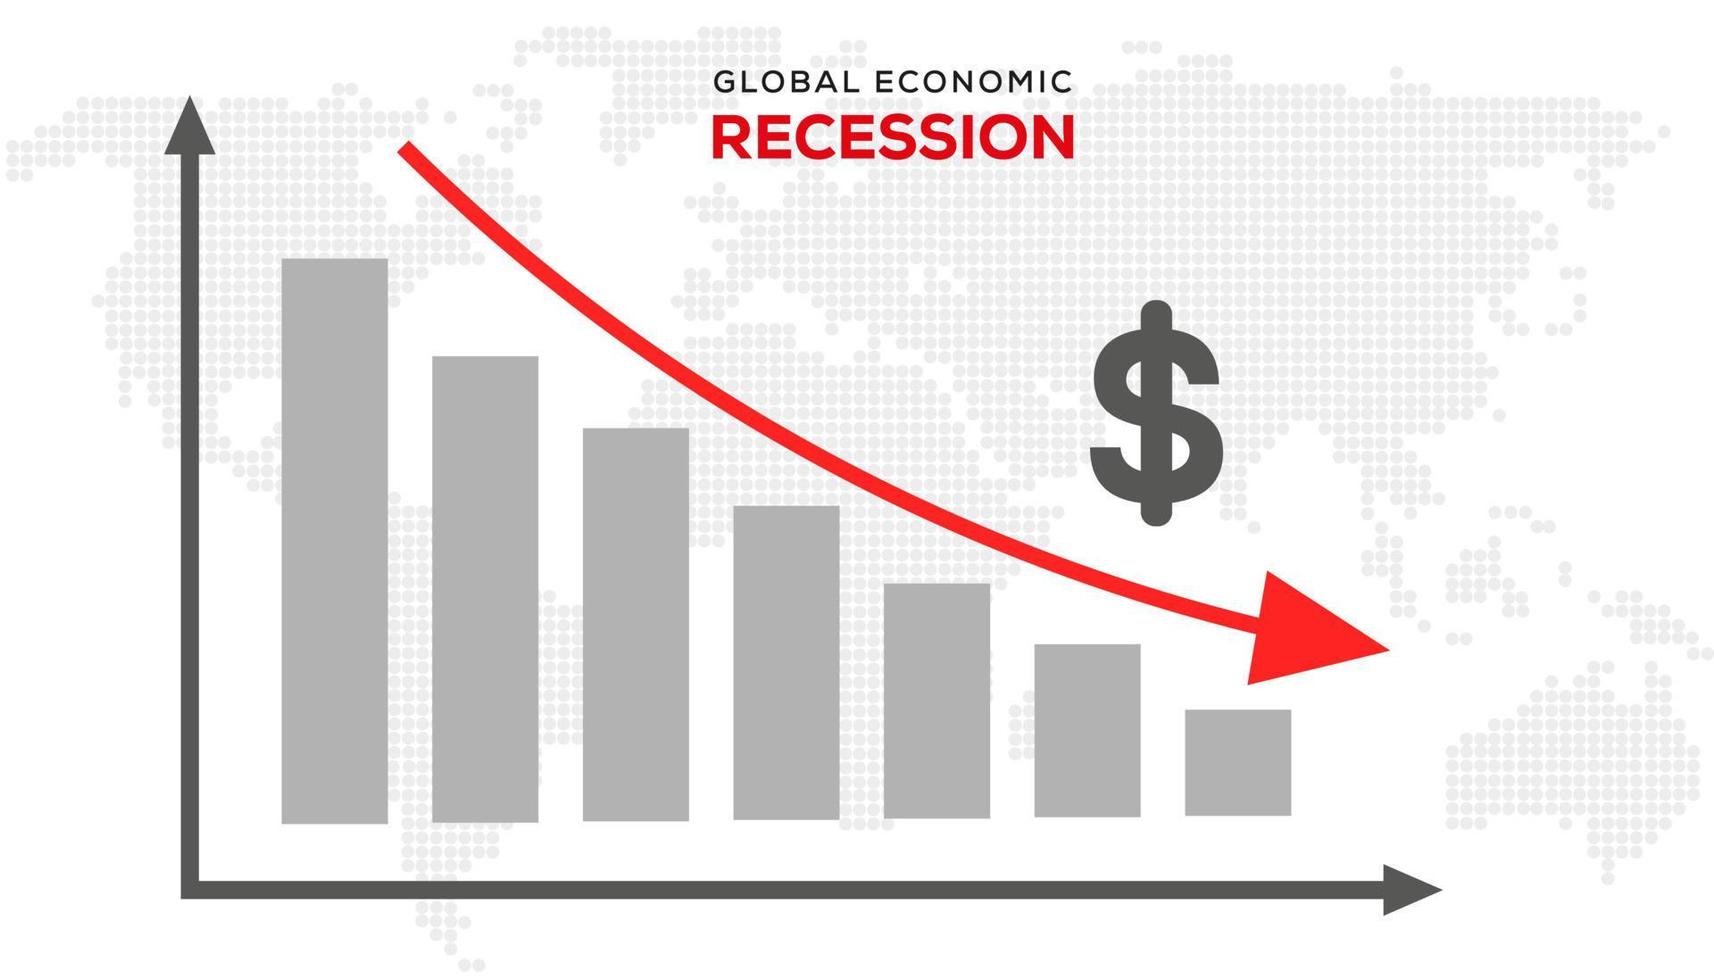 Global Recession Background. illustration of economic recession with red arrow symbol falling down vector